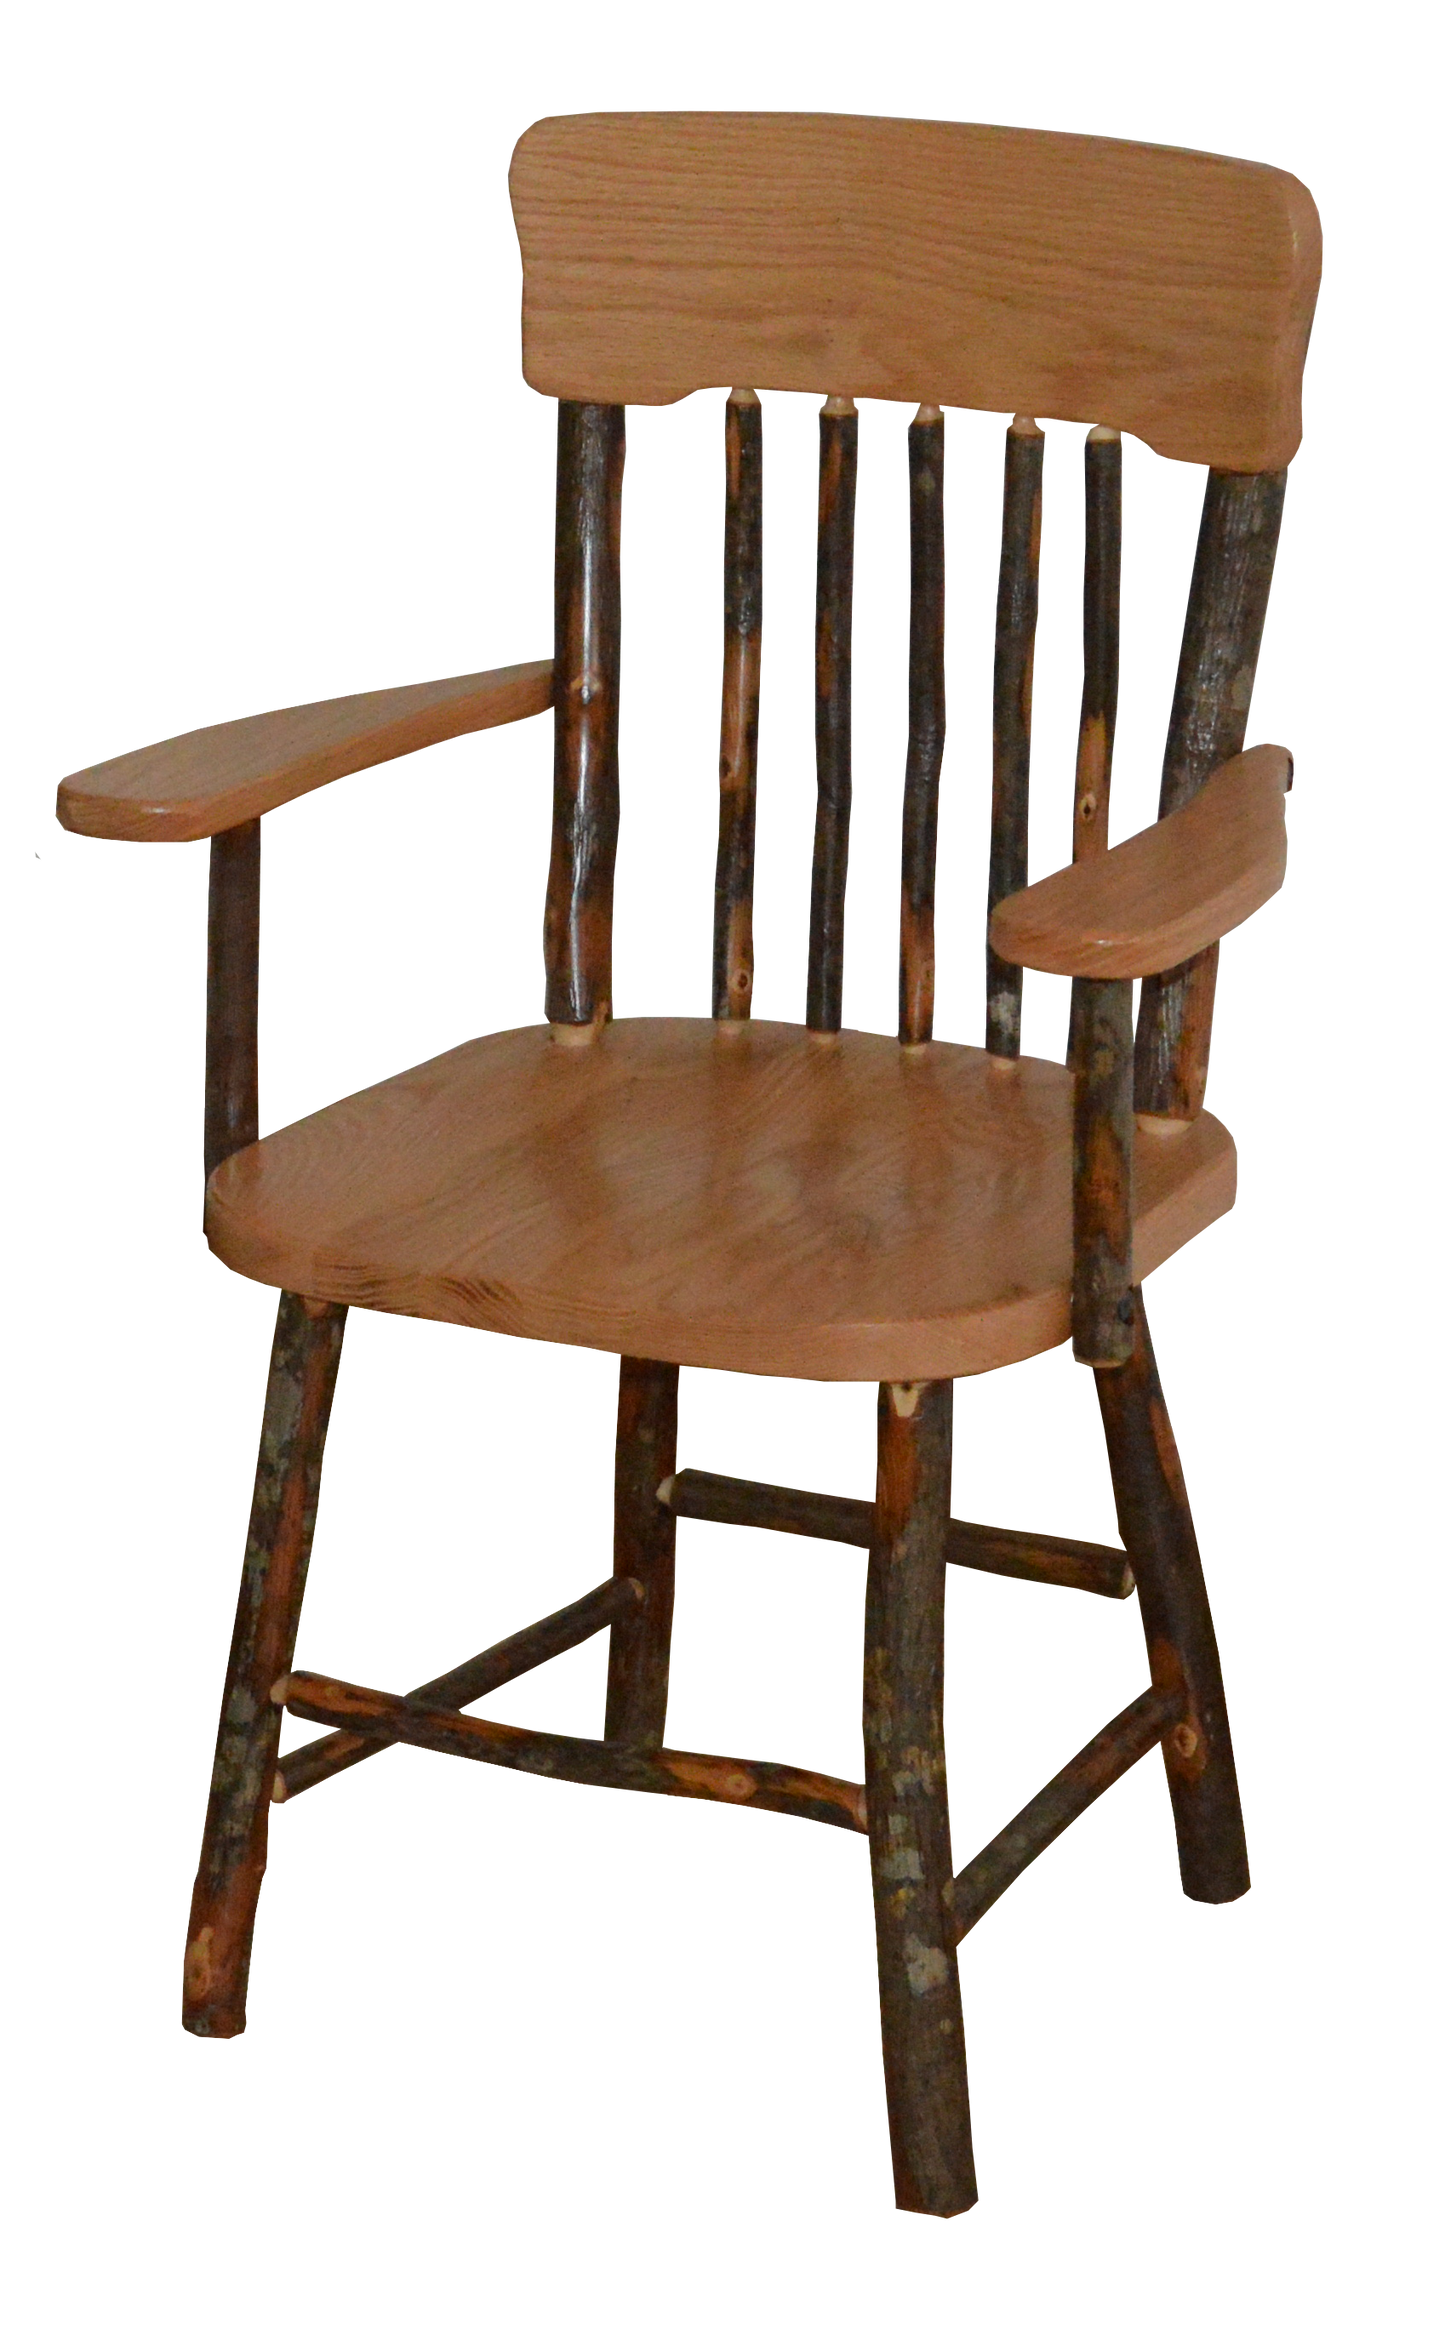 A&L Furniture Co. Amish Hickory Panel Back Dining Chair With Arms - LEAD TIME TO SHIP 10 BUSINESS DAYS